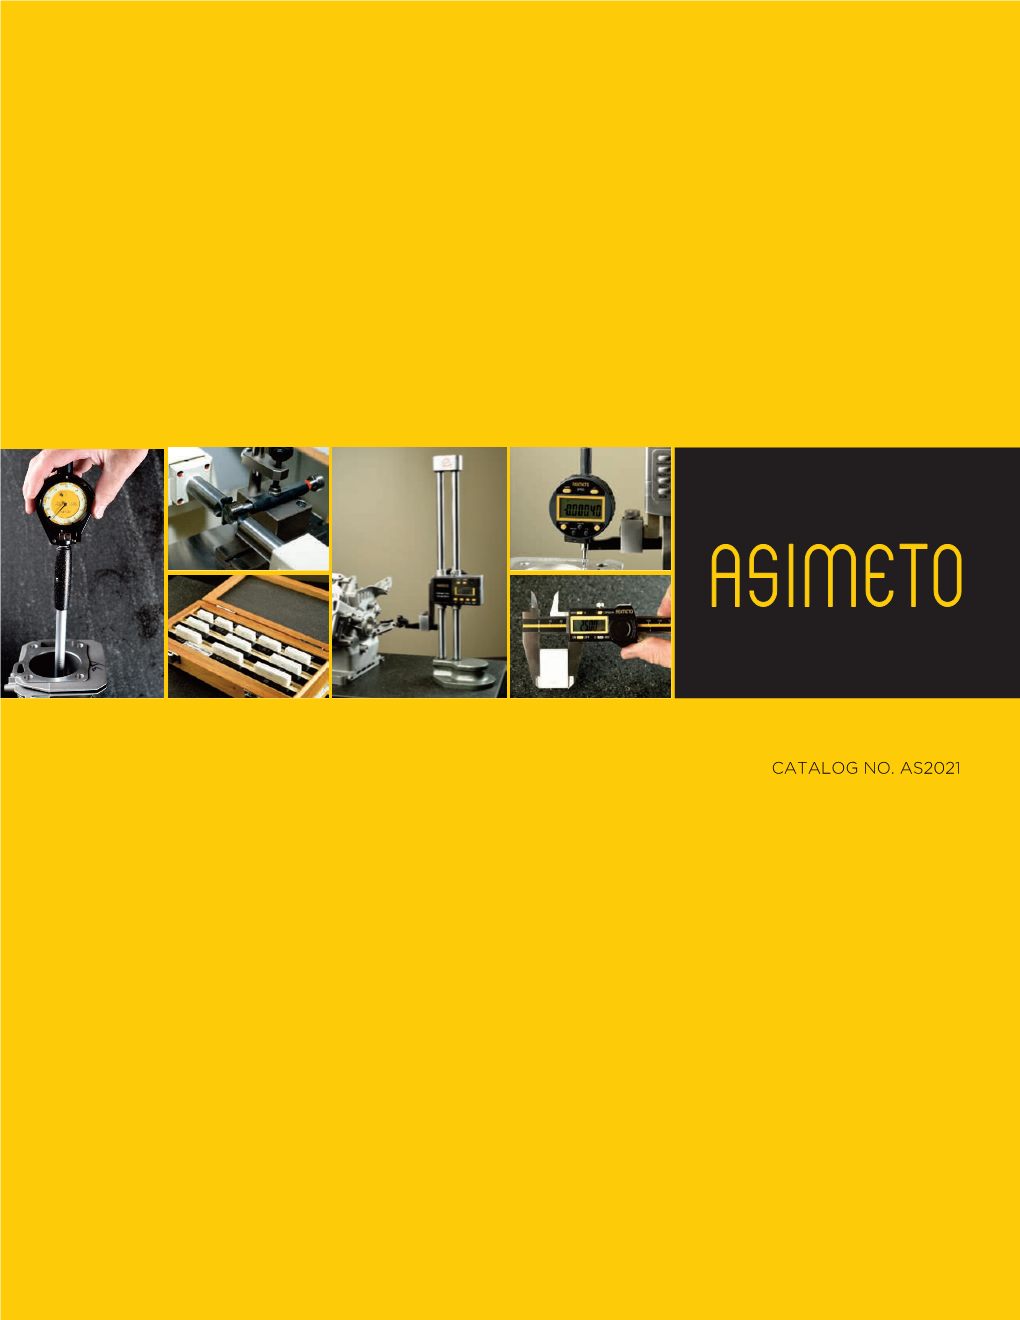 ASIMETO CATALOG 2021 Precision Is Not Only Deﬁned by Degrees of Exactness